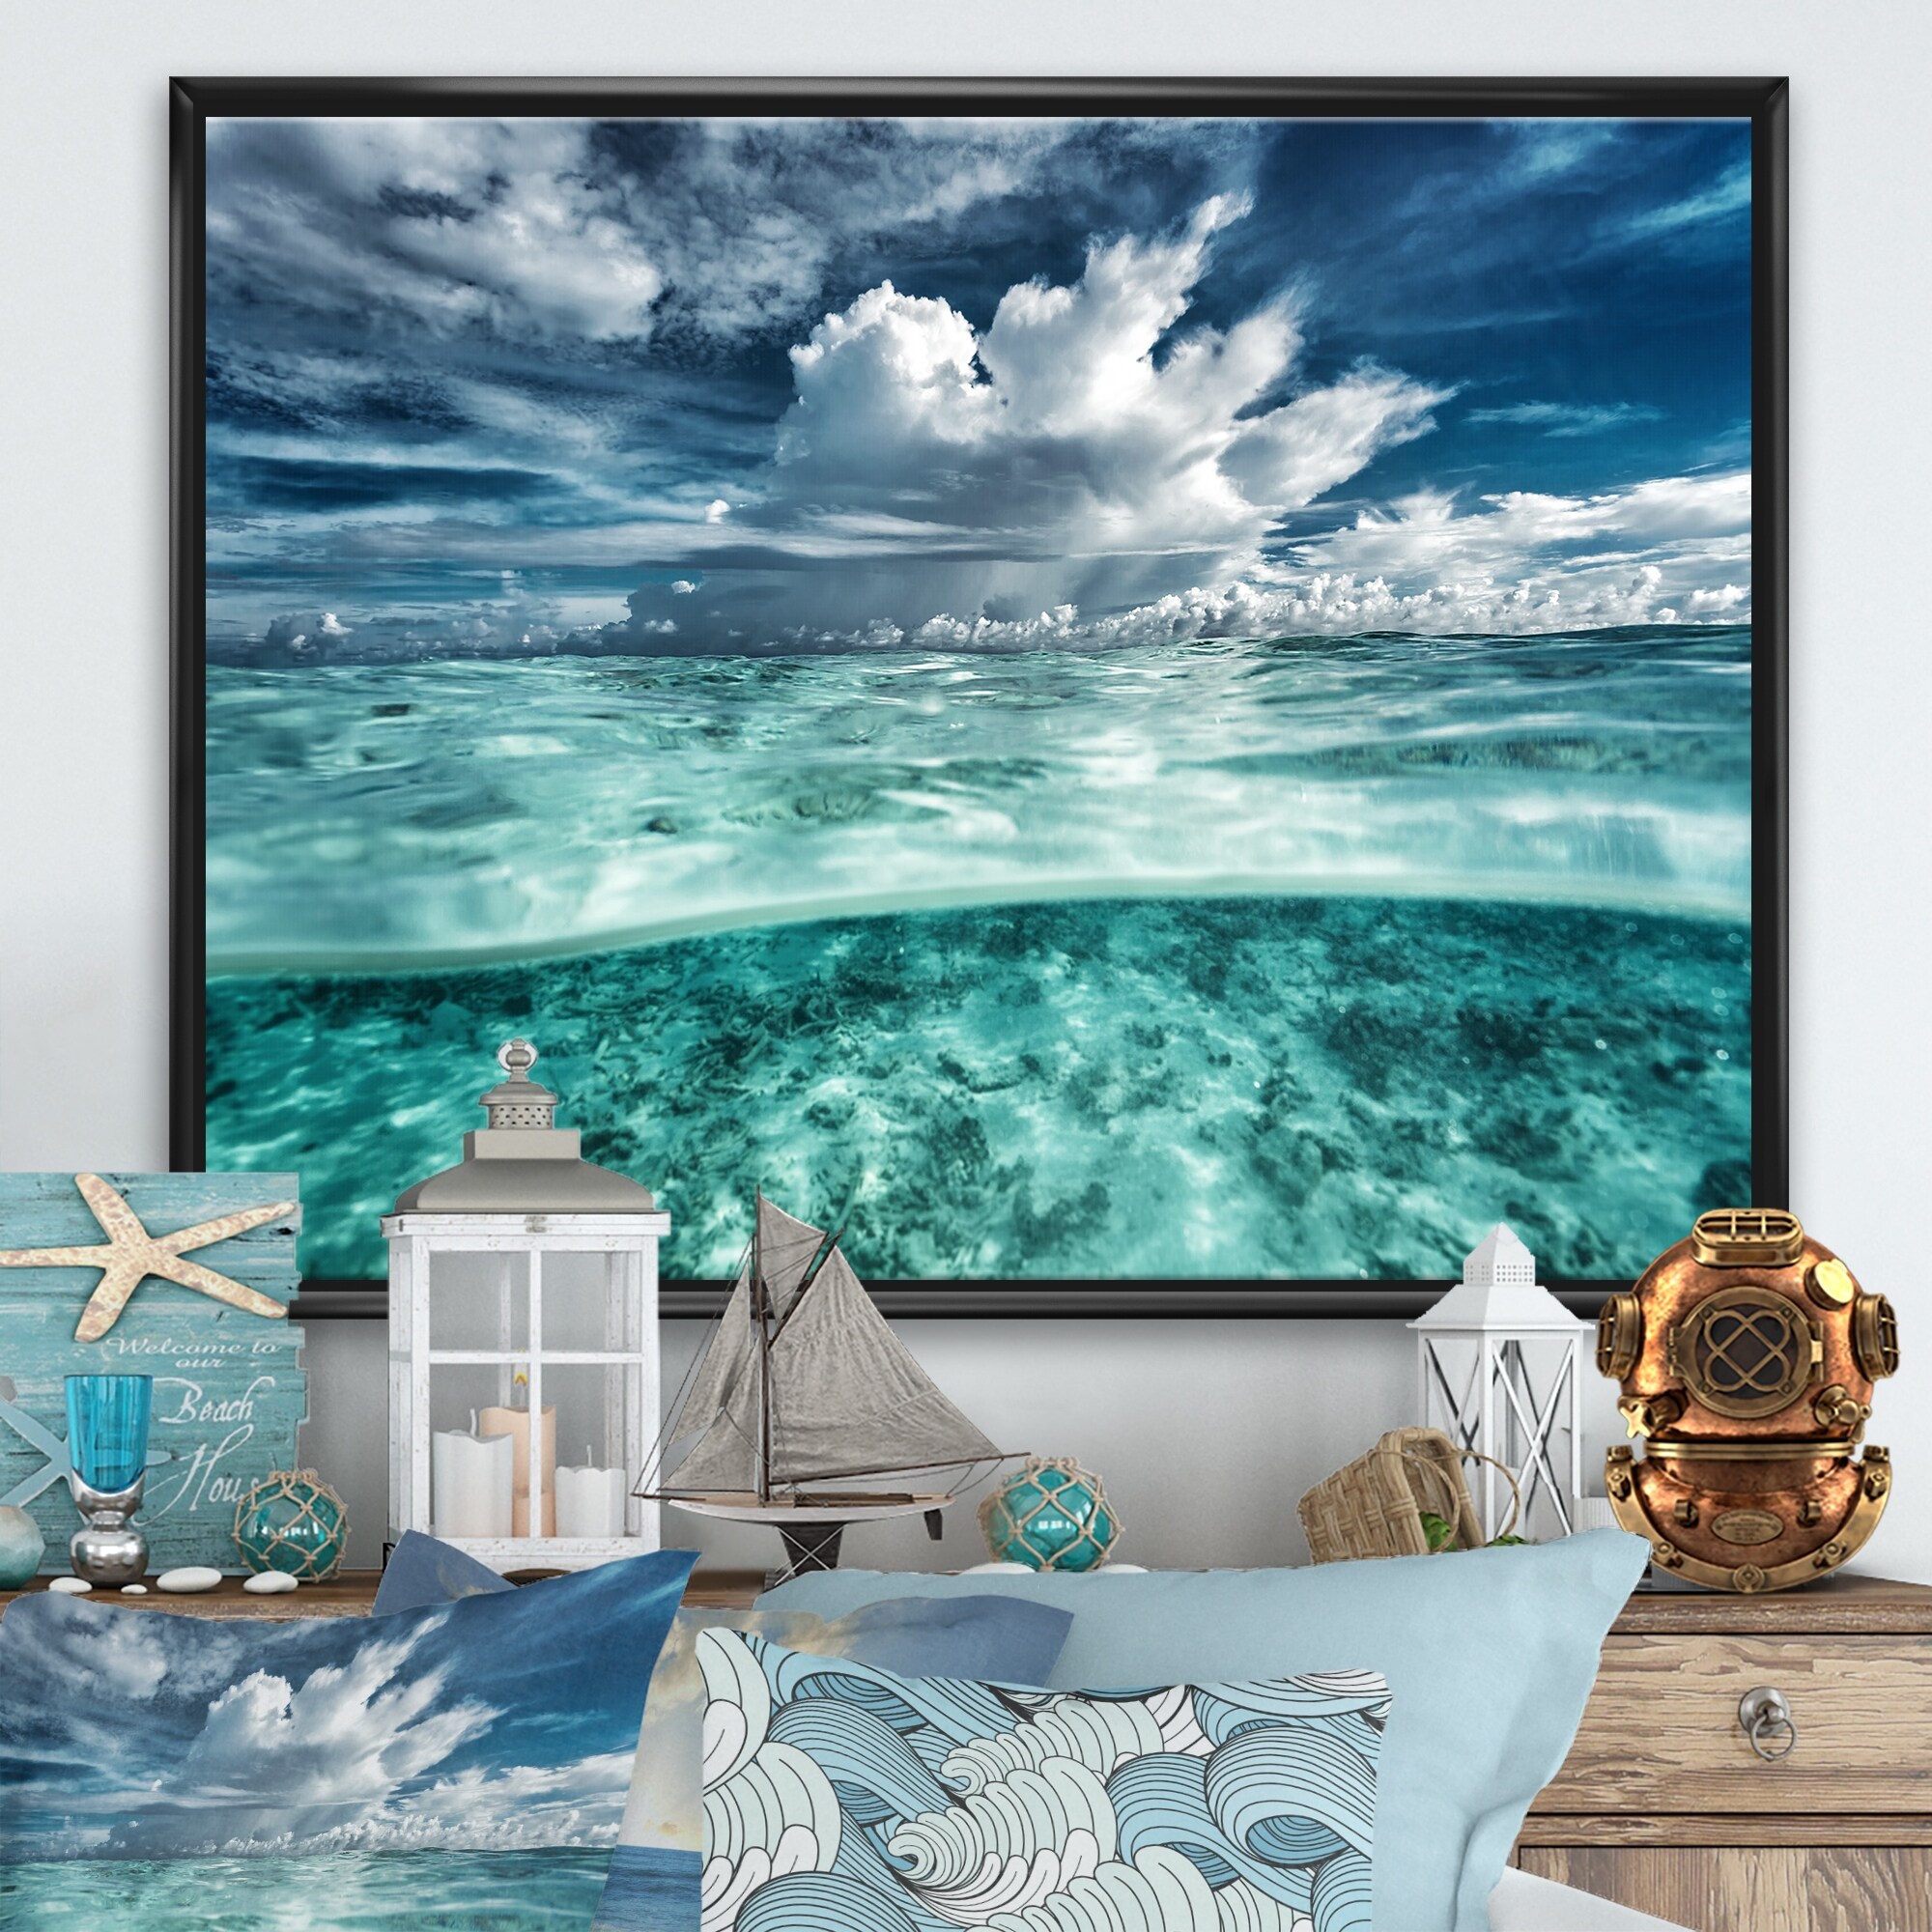 Wall Art For Living Room Large Size Wall Decorations Pictures Blue Sun Beach Grass Ocean Landscape Painting Office Wall Decor Canvas Prints Ready To H - 2